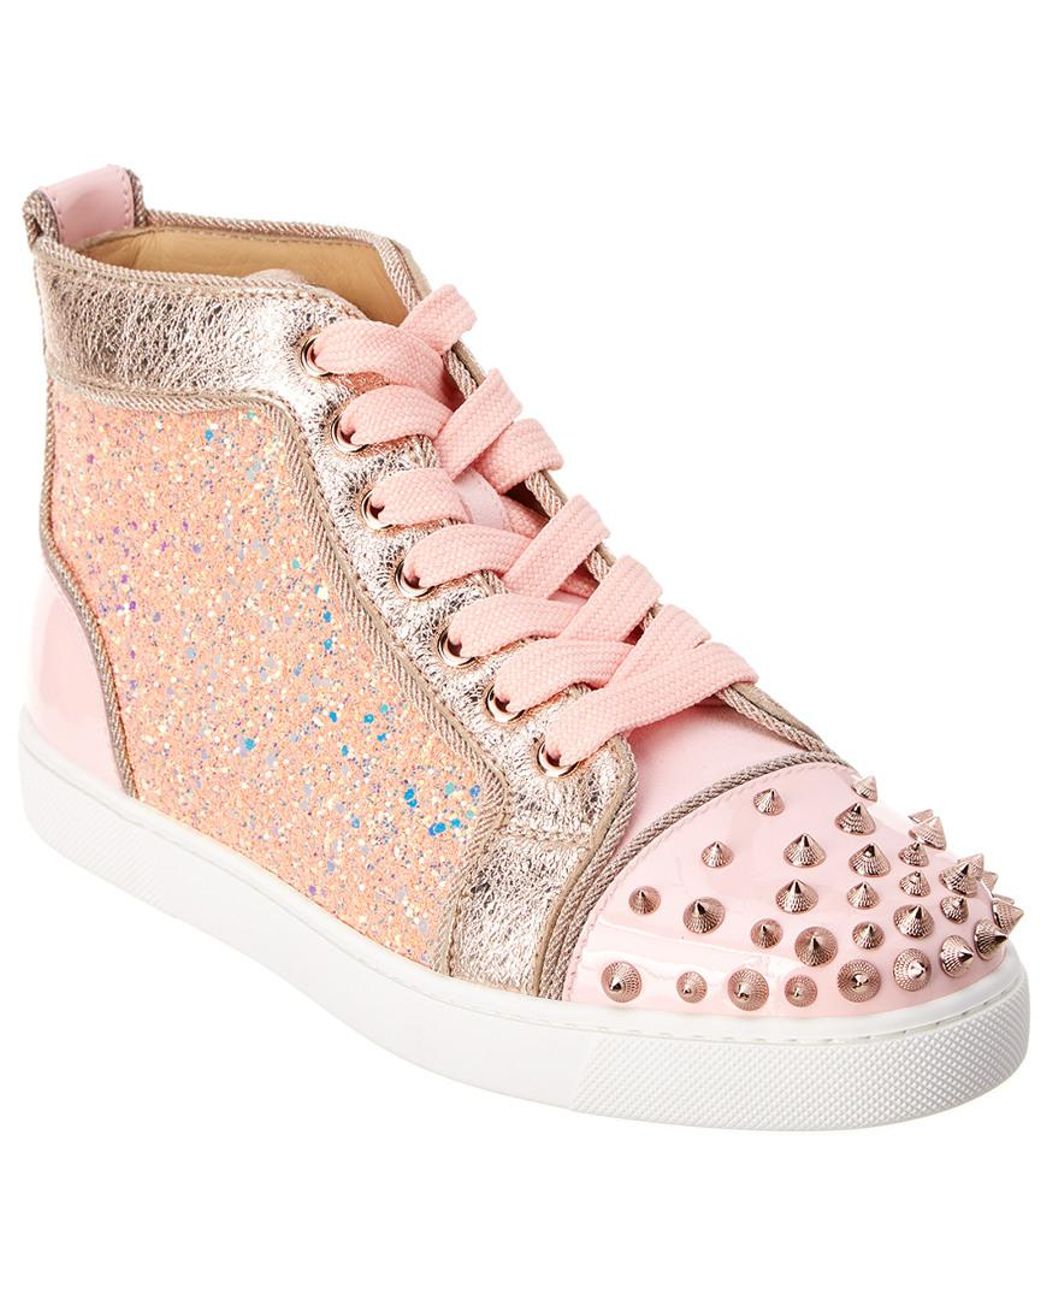 Christian Louboutin Lou Spikes Leather Sneaker in Pink | Lyst